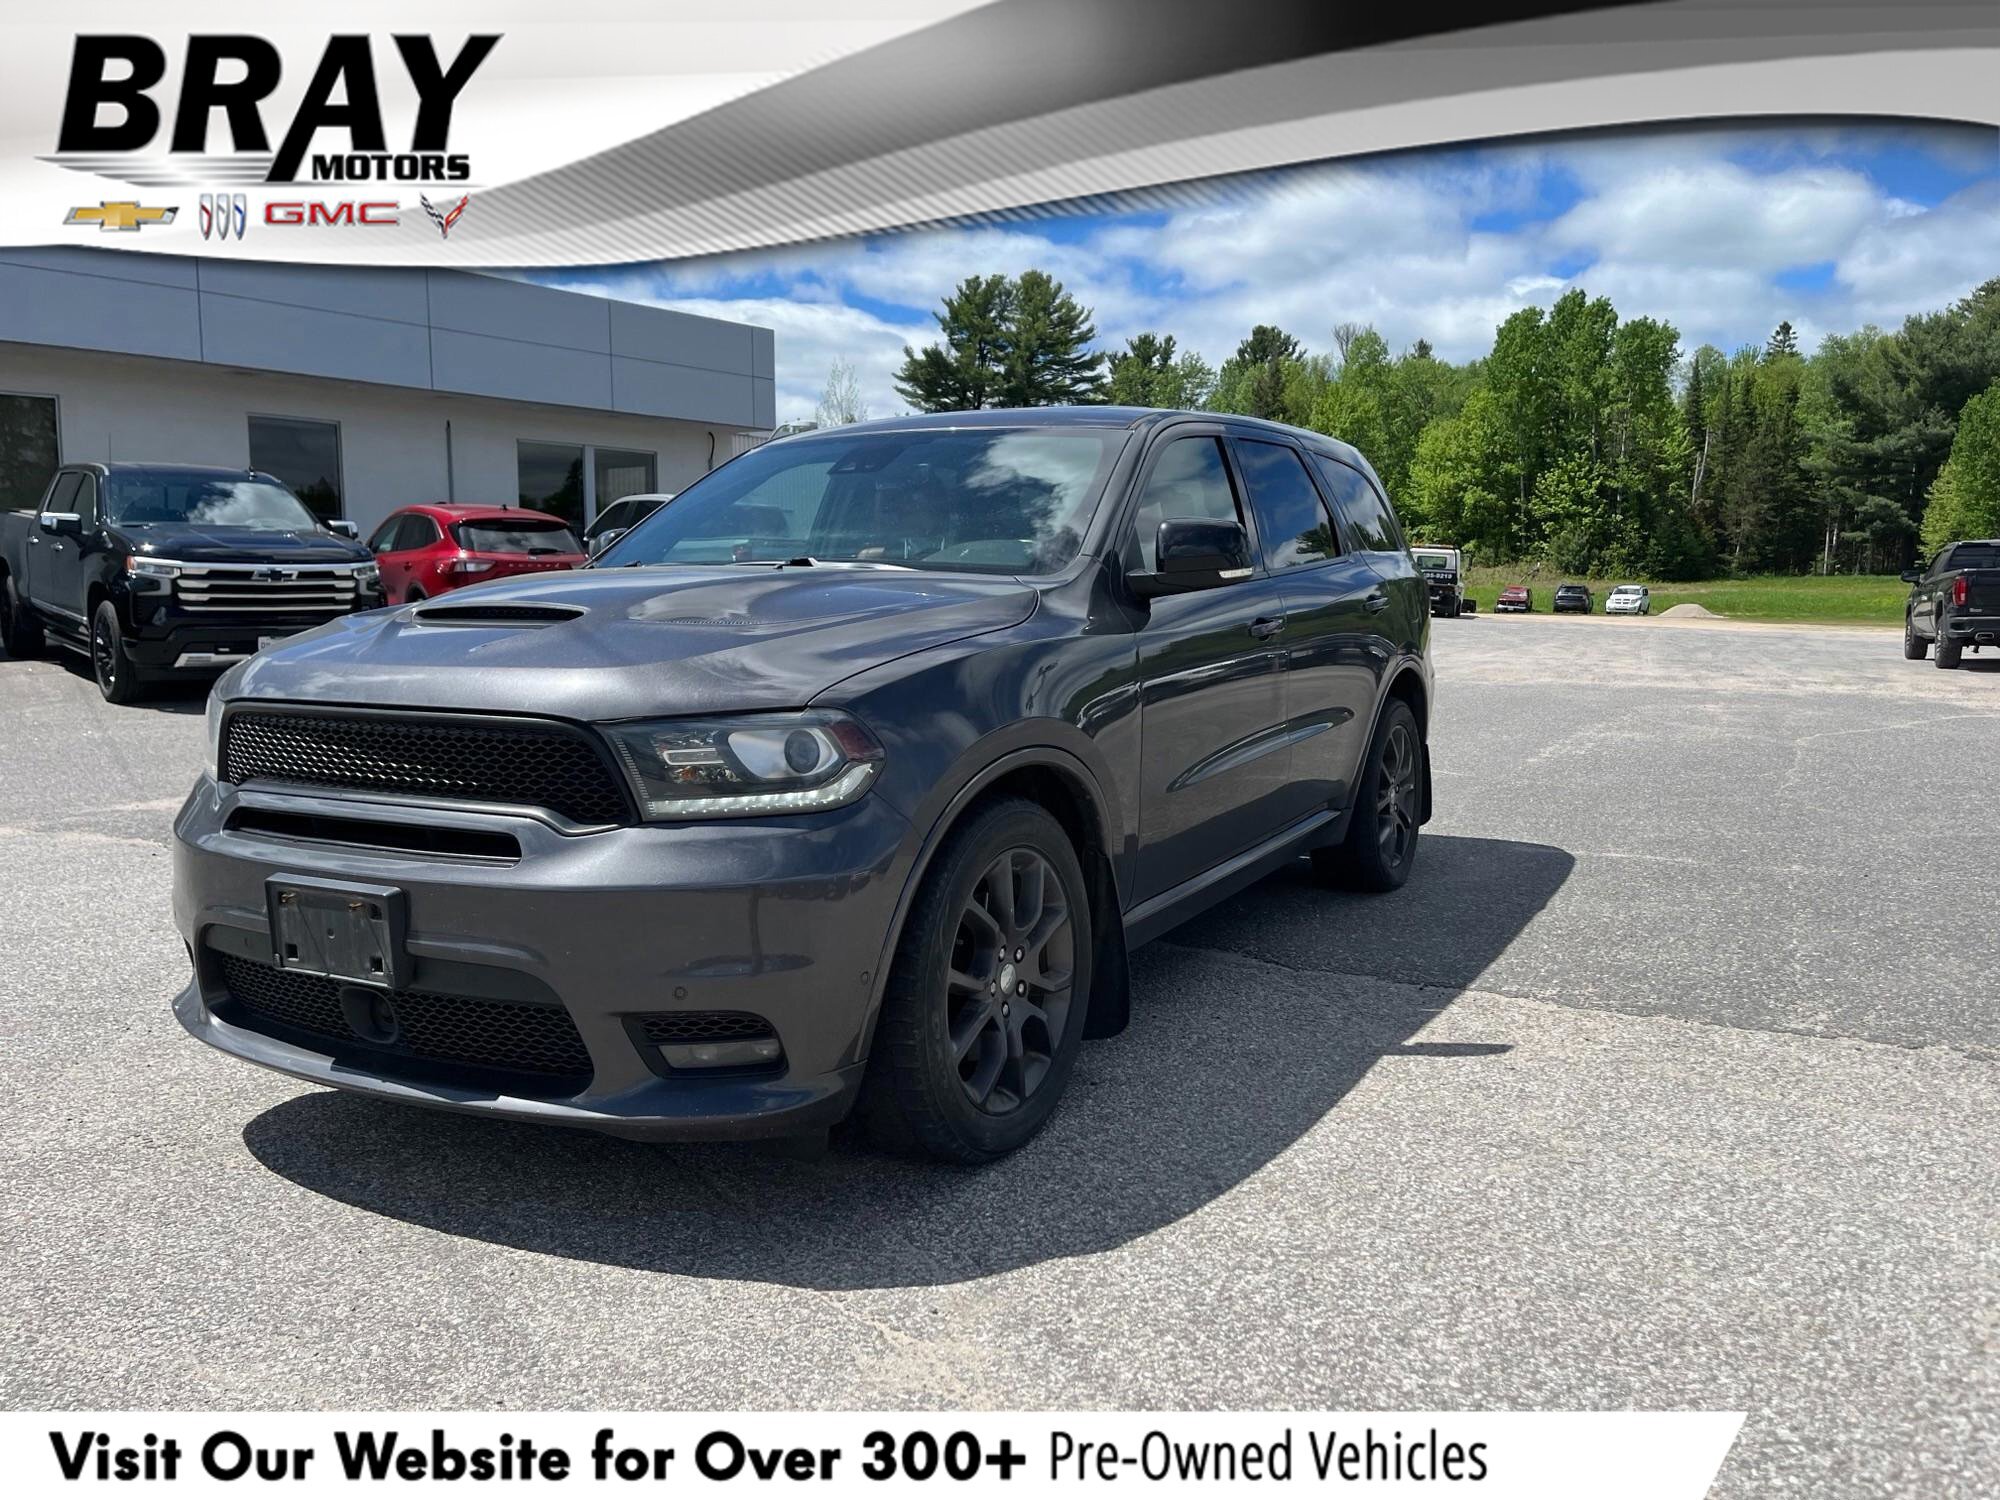 2018 Dodge Durango R/T CERTIFIED PRE-OWNED WITH A CLEAN CARFAX!